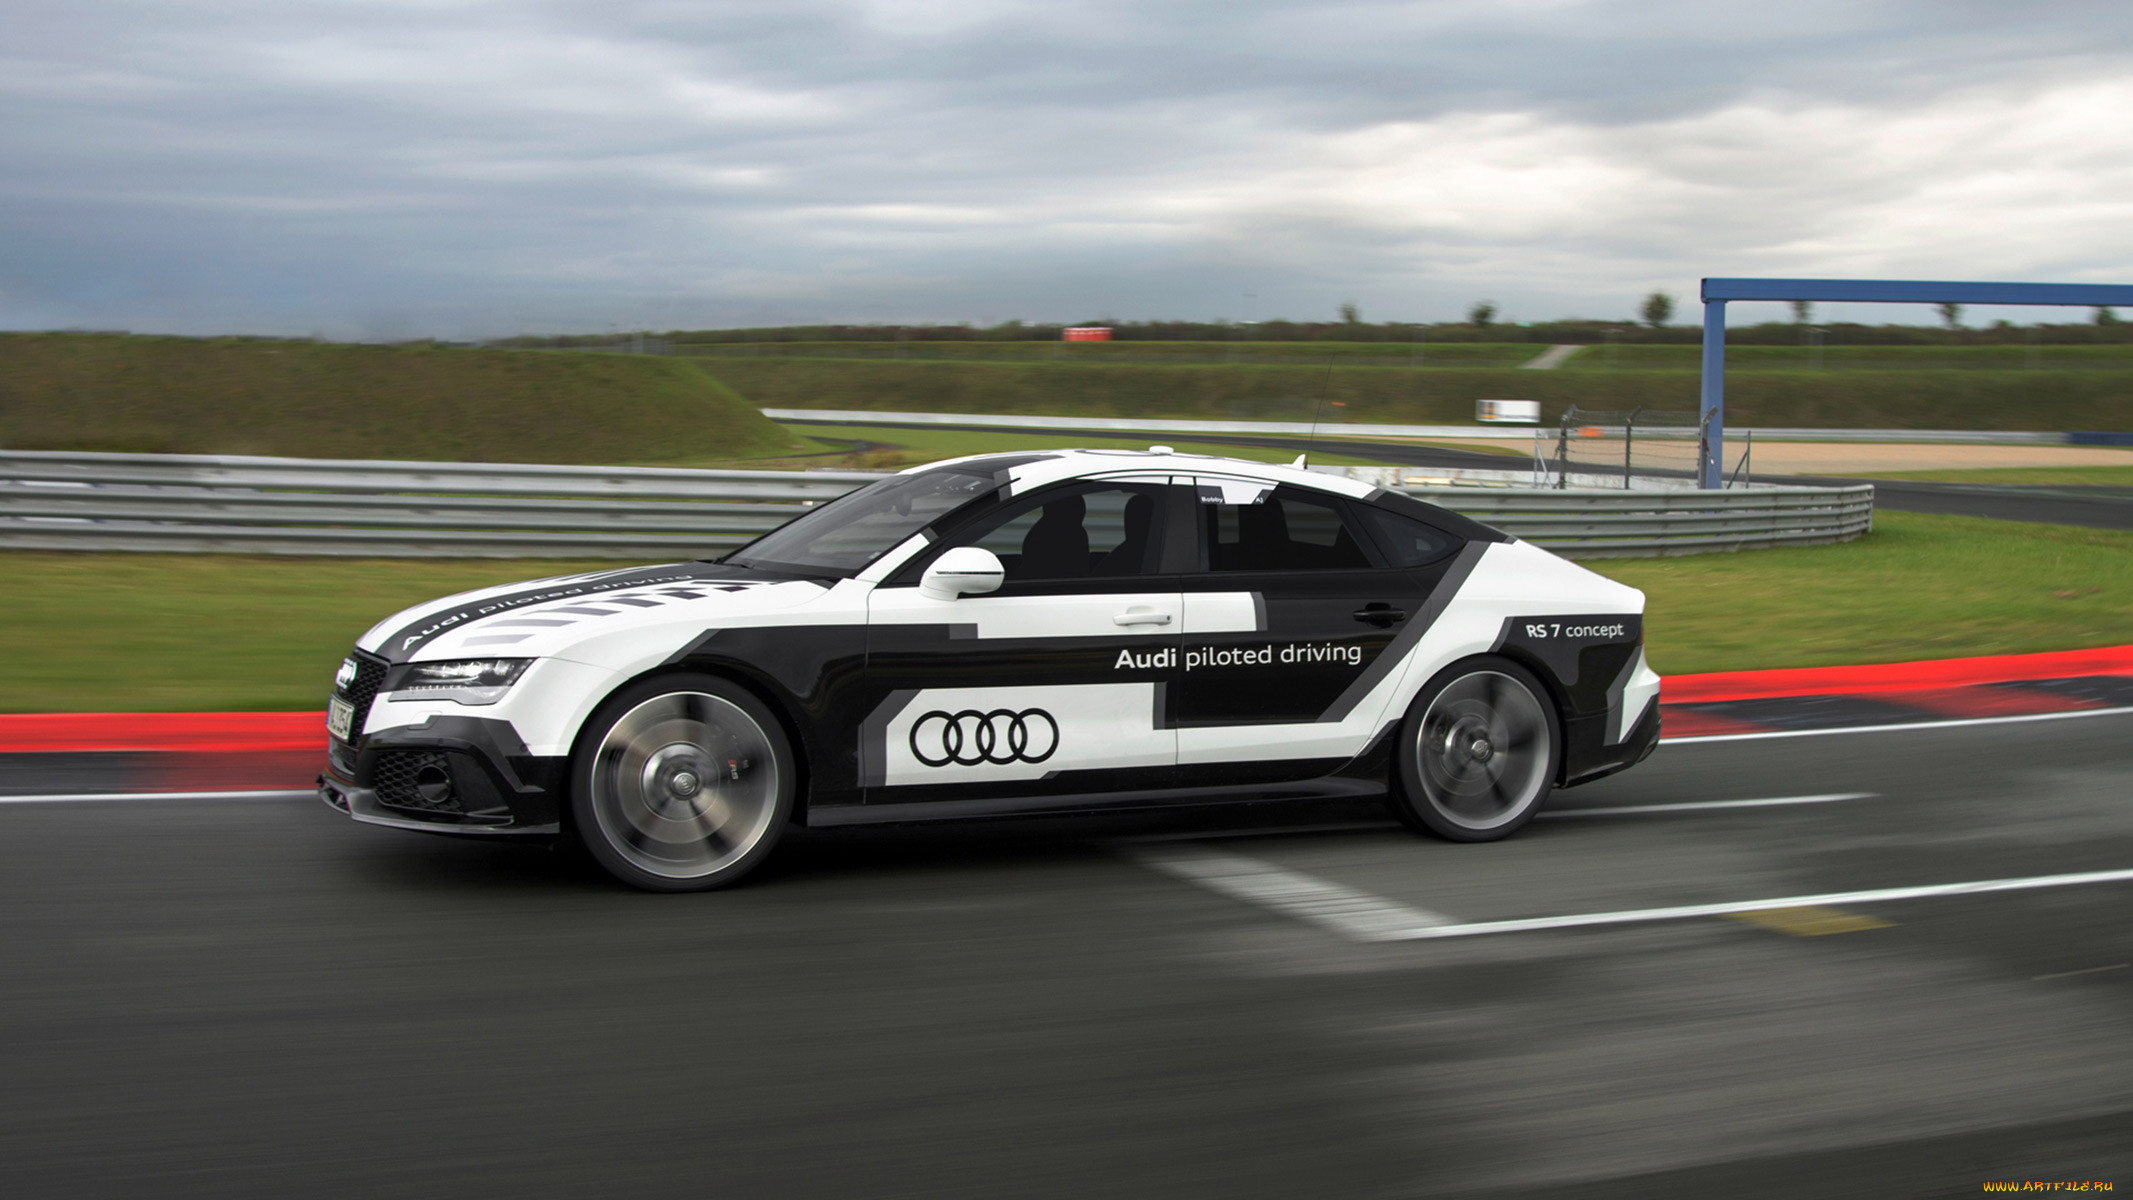 audi rs7 piloted driving concept 2014, , audi, rs7, 2014, concept, piloted, driving